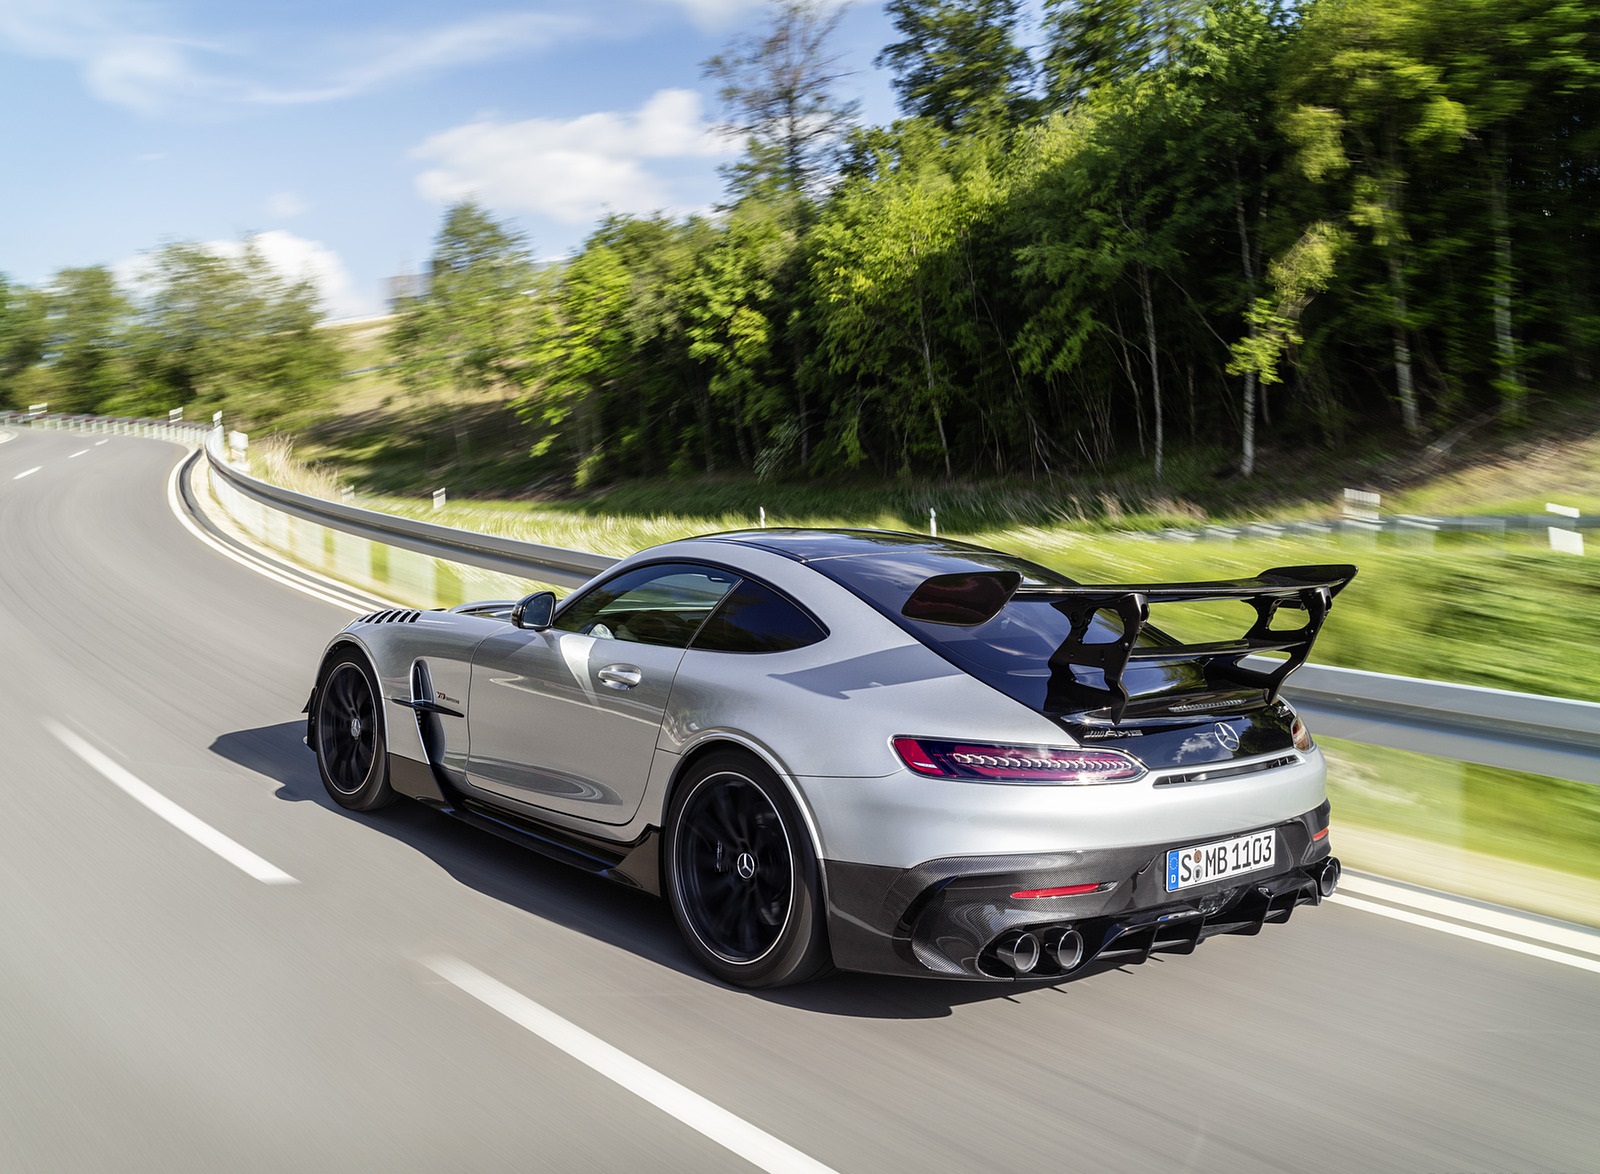 2021 Mercedes-AMG GT Black Series (Color: High Tech Silver) Rear Three-Quarter Wallpapers #140 of 204